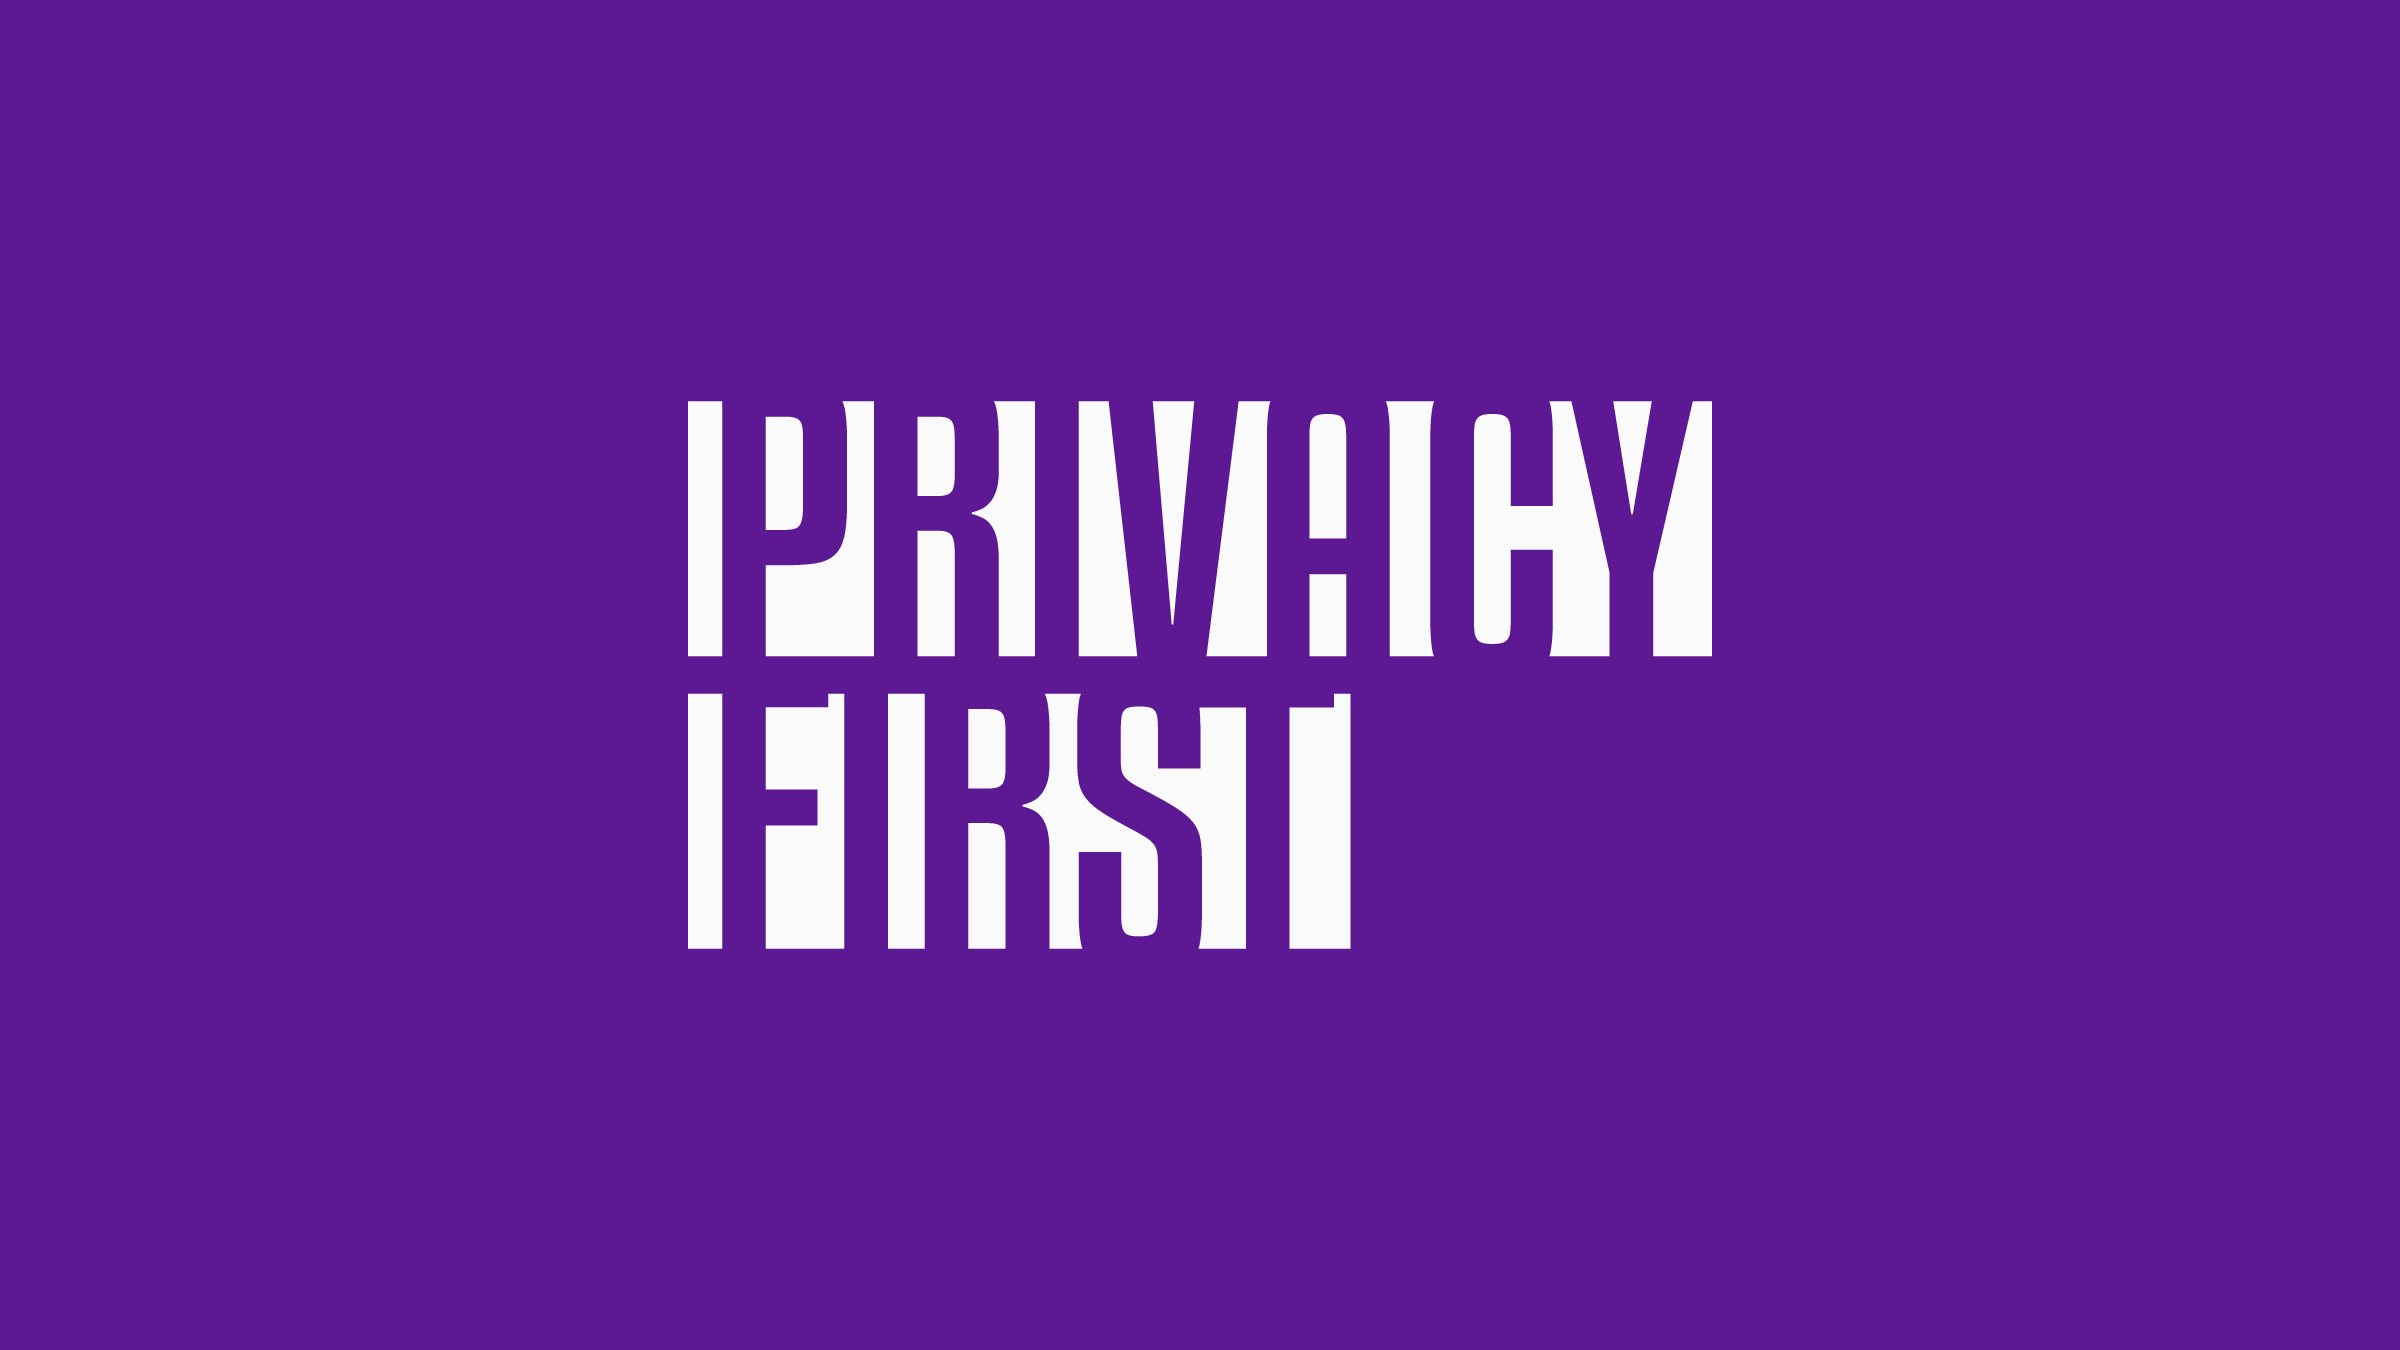 Jet-Stream is nominated for the Dutch Privacy Award by Privacy First.